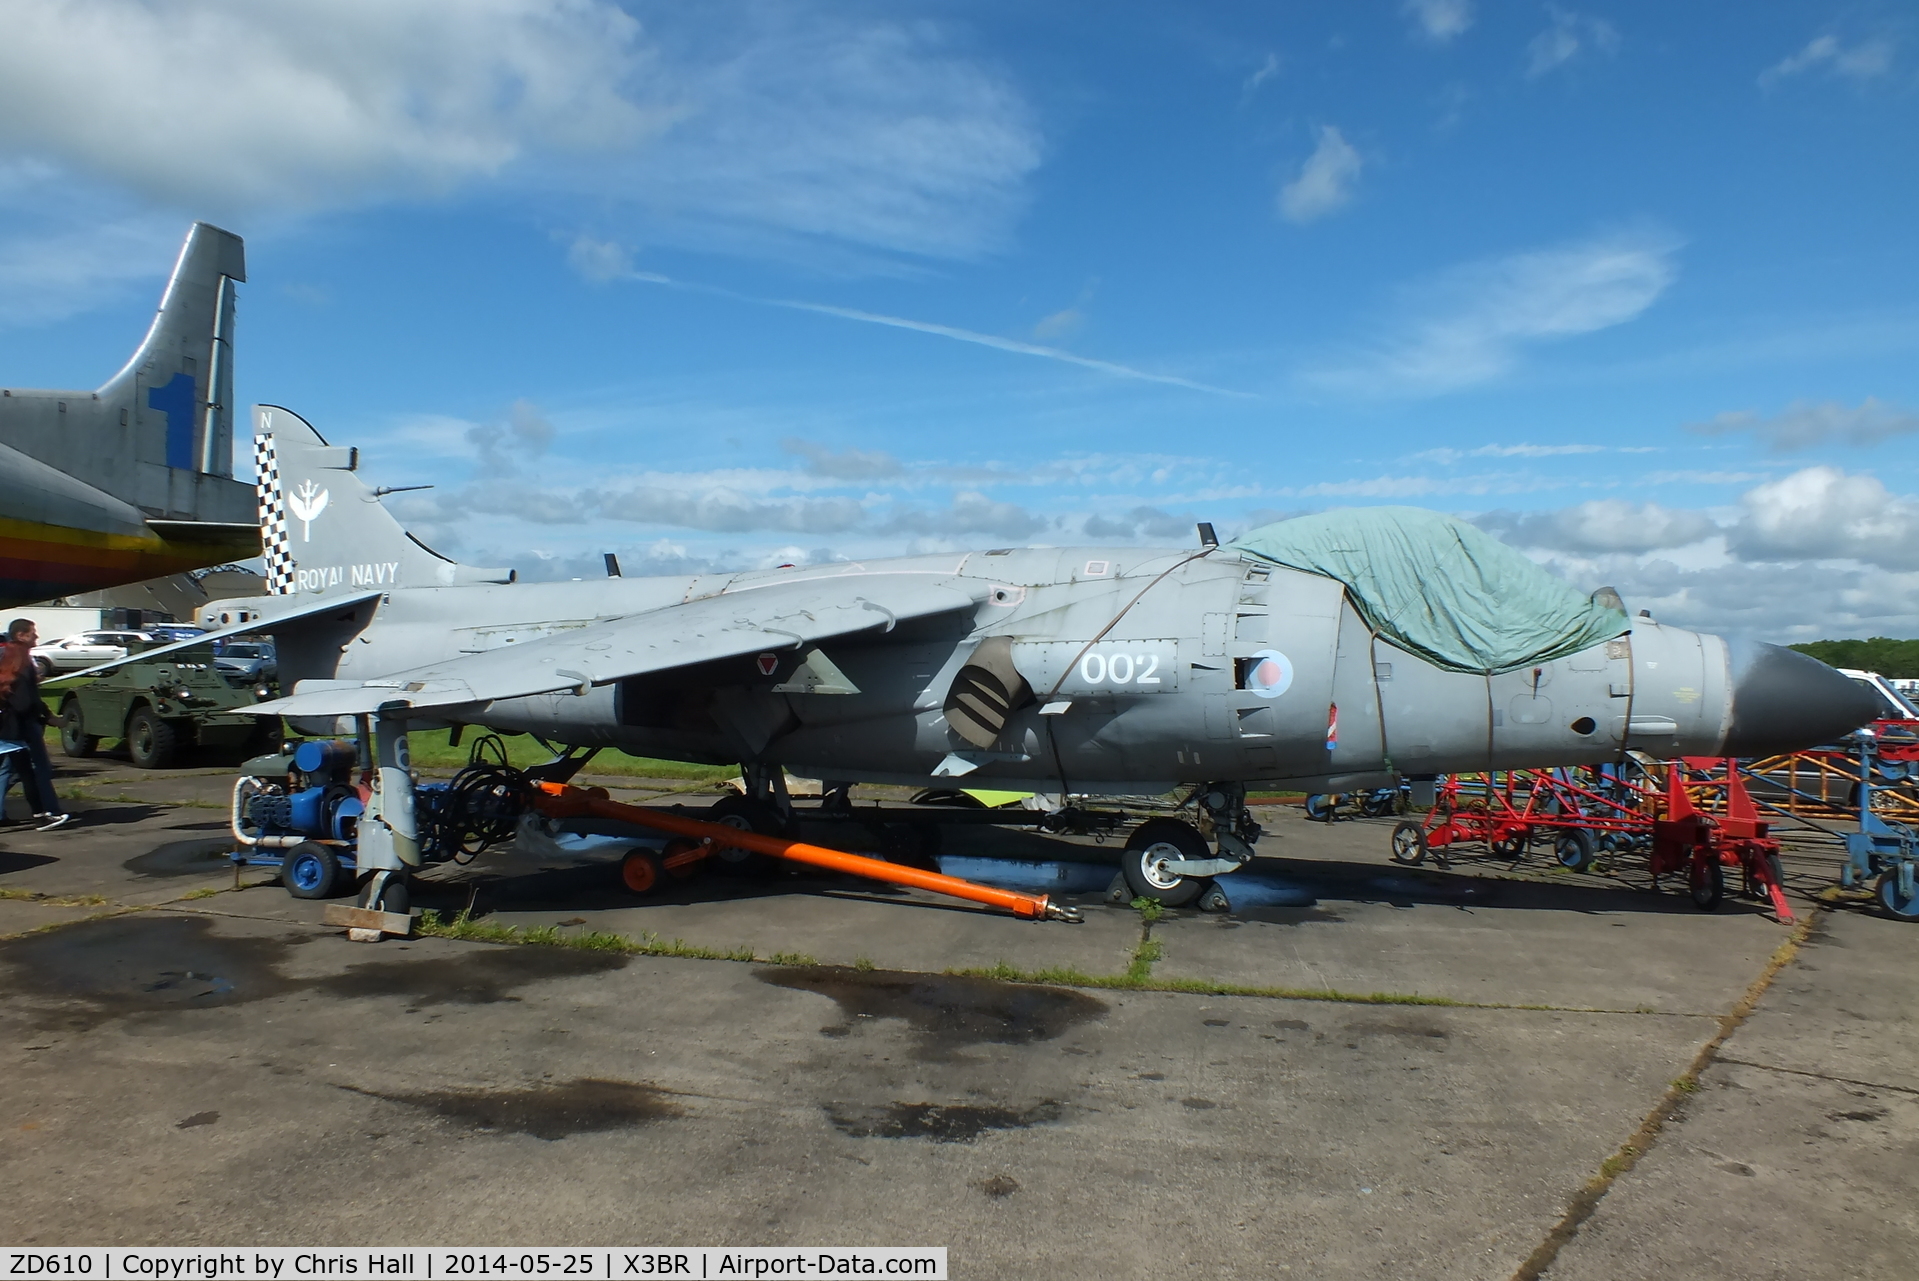 ZD610, 1985 British Aerospace Sea Harrier F/A.2 C/N 1H-912049/B43/P27, at the Cold War Jets Open Day 2014